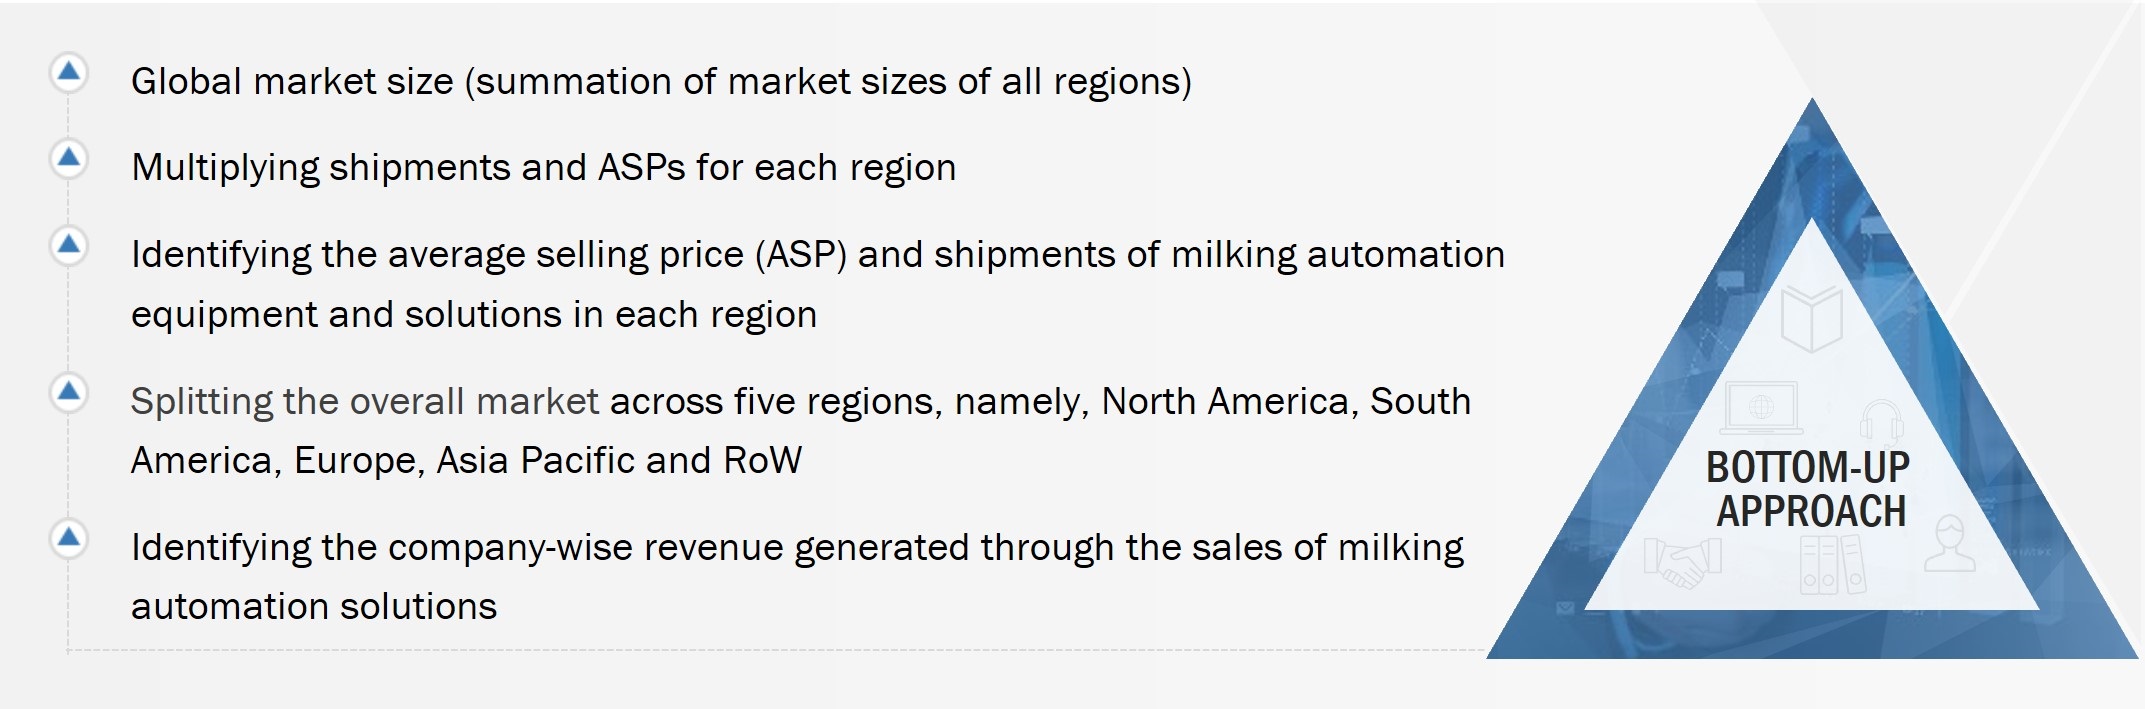 Milking Automation Market Size, and Bottom-Up Approach 